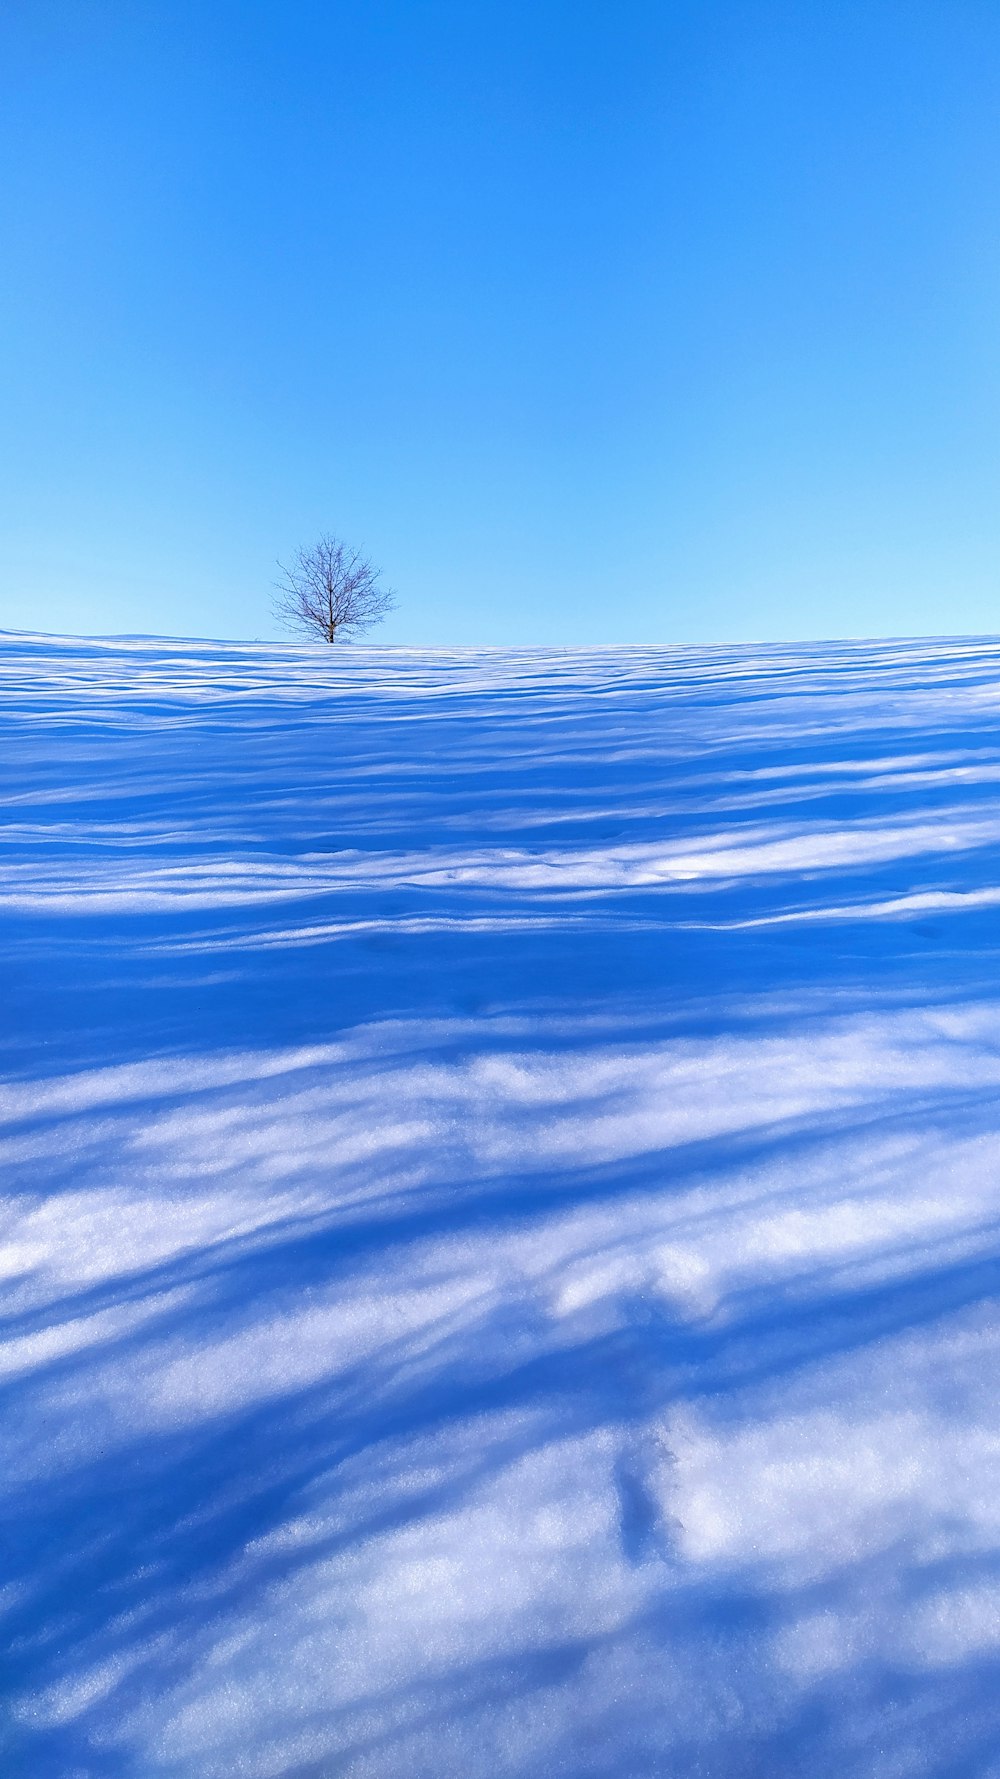 a lone tree in the middle of a vast expanse of snow